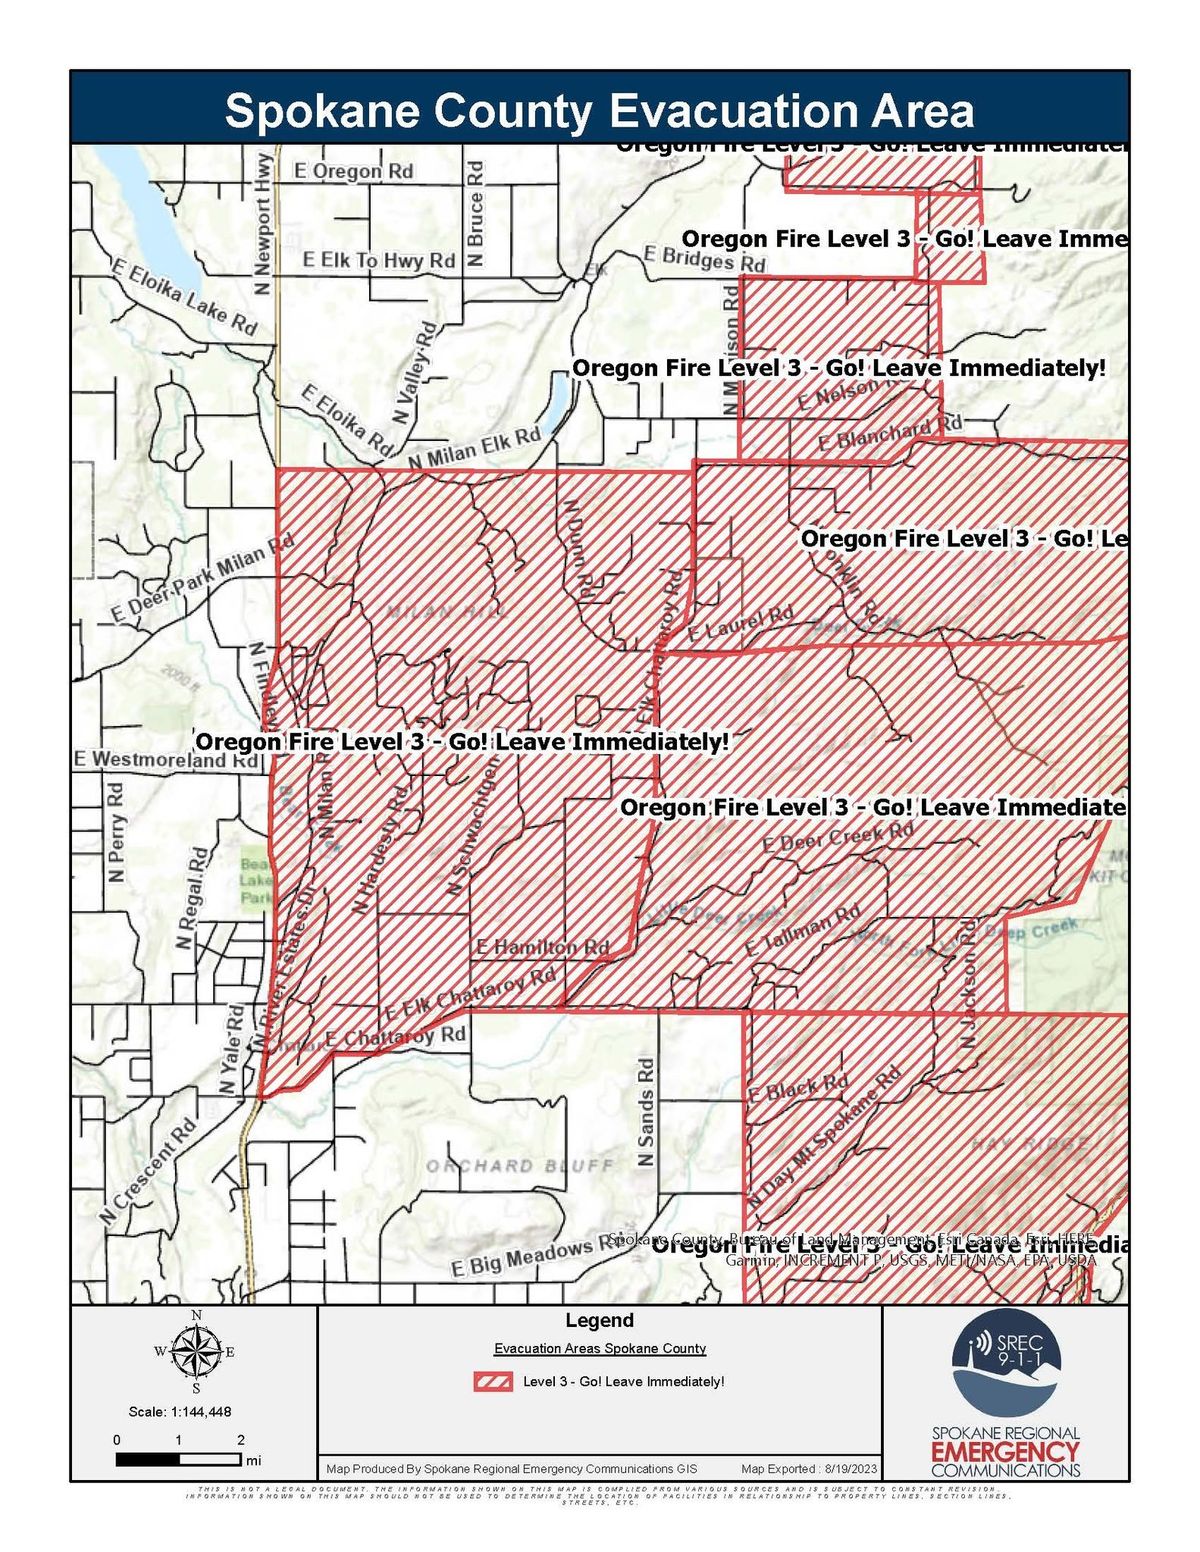 A massive area was under level 3 evacuation orders on Saturday as a result of the Oregon fire. 